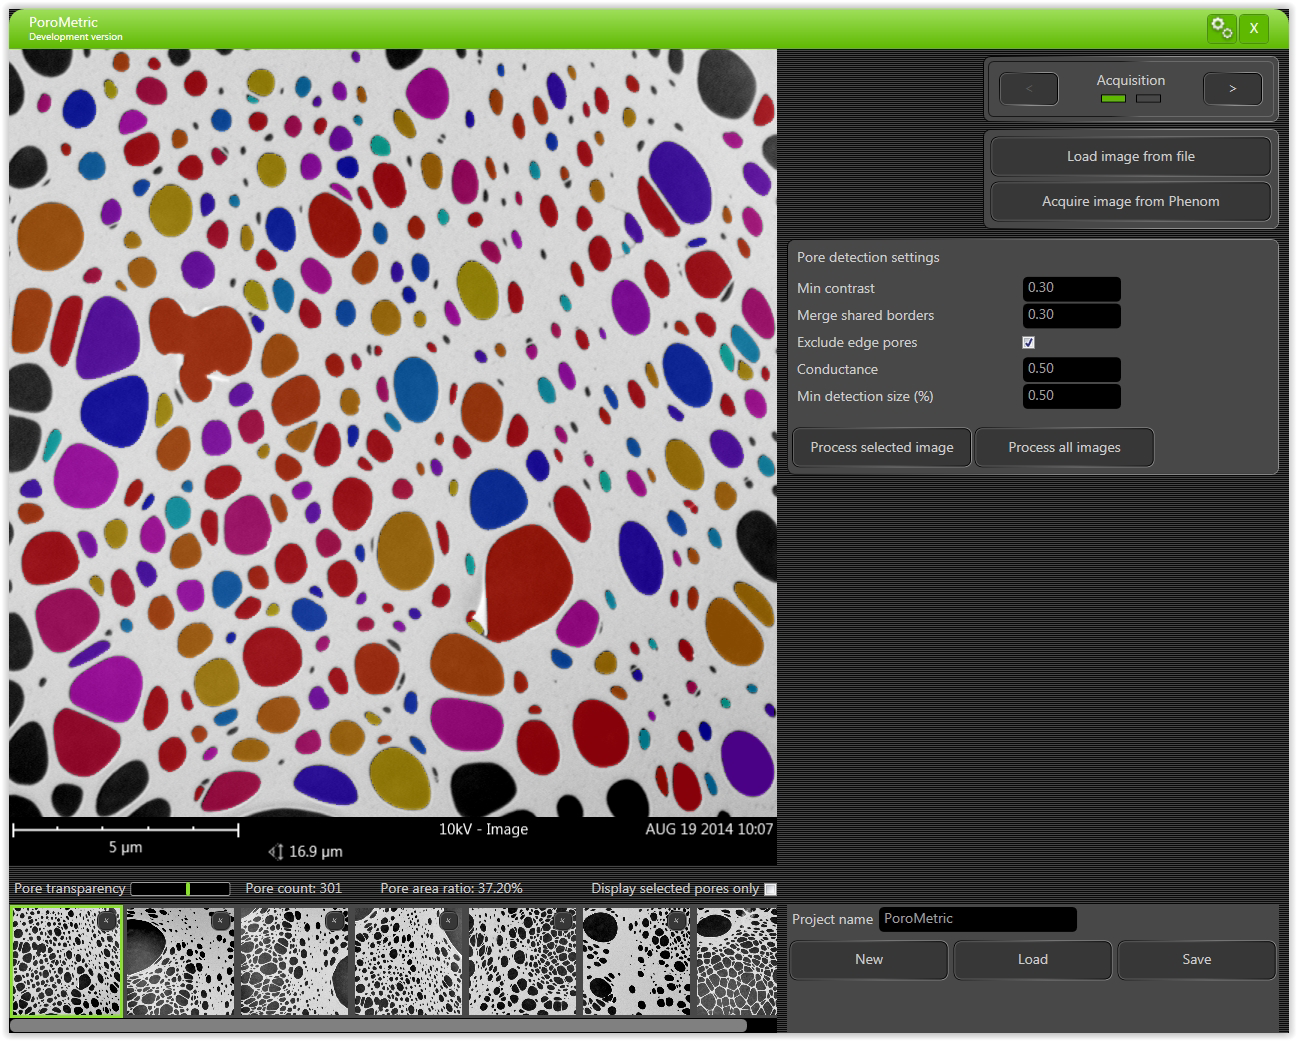 Pore size analysis software for tabletop SEM